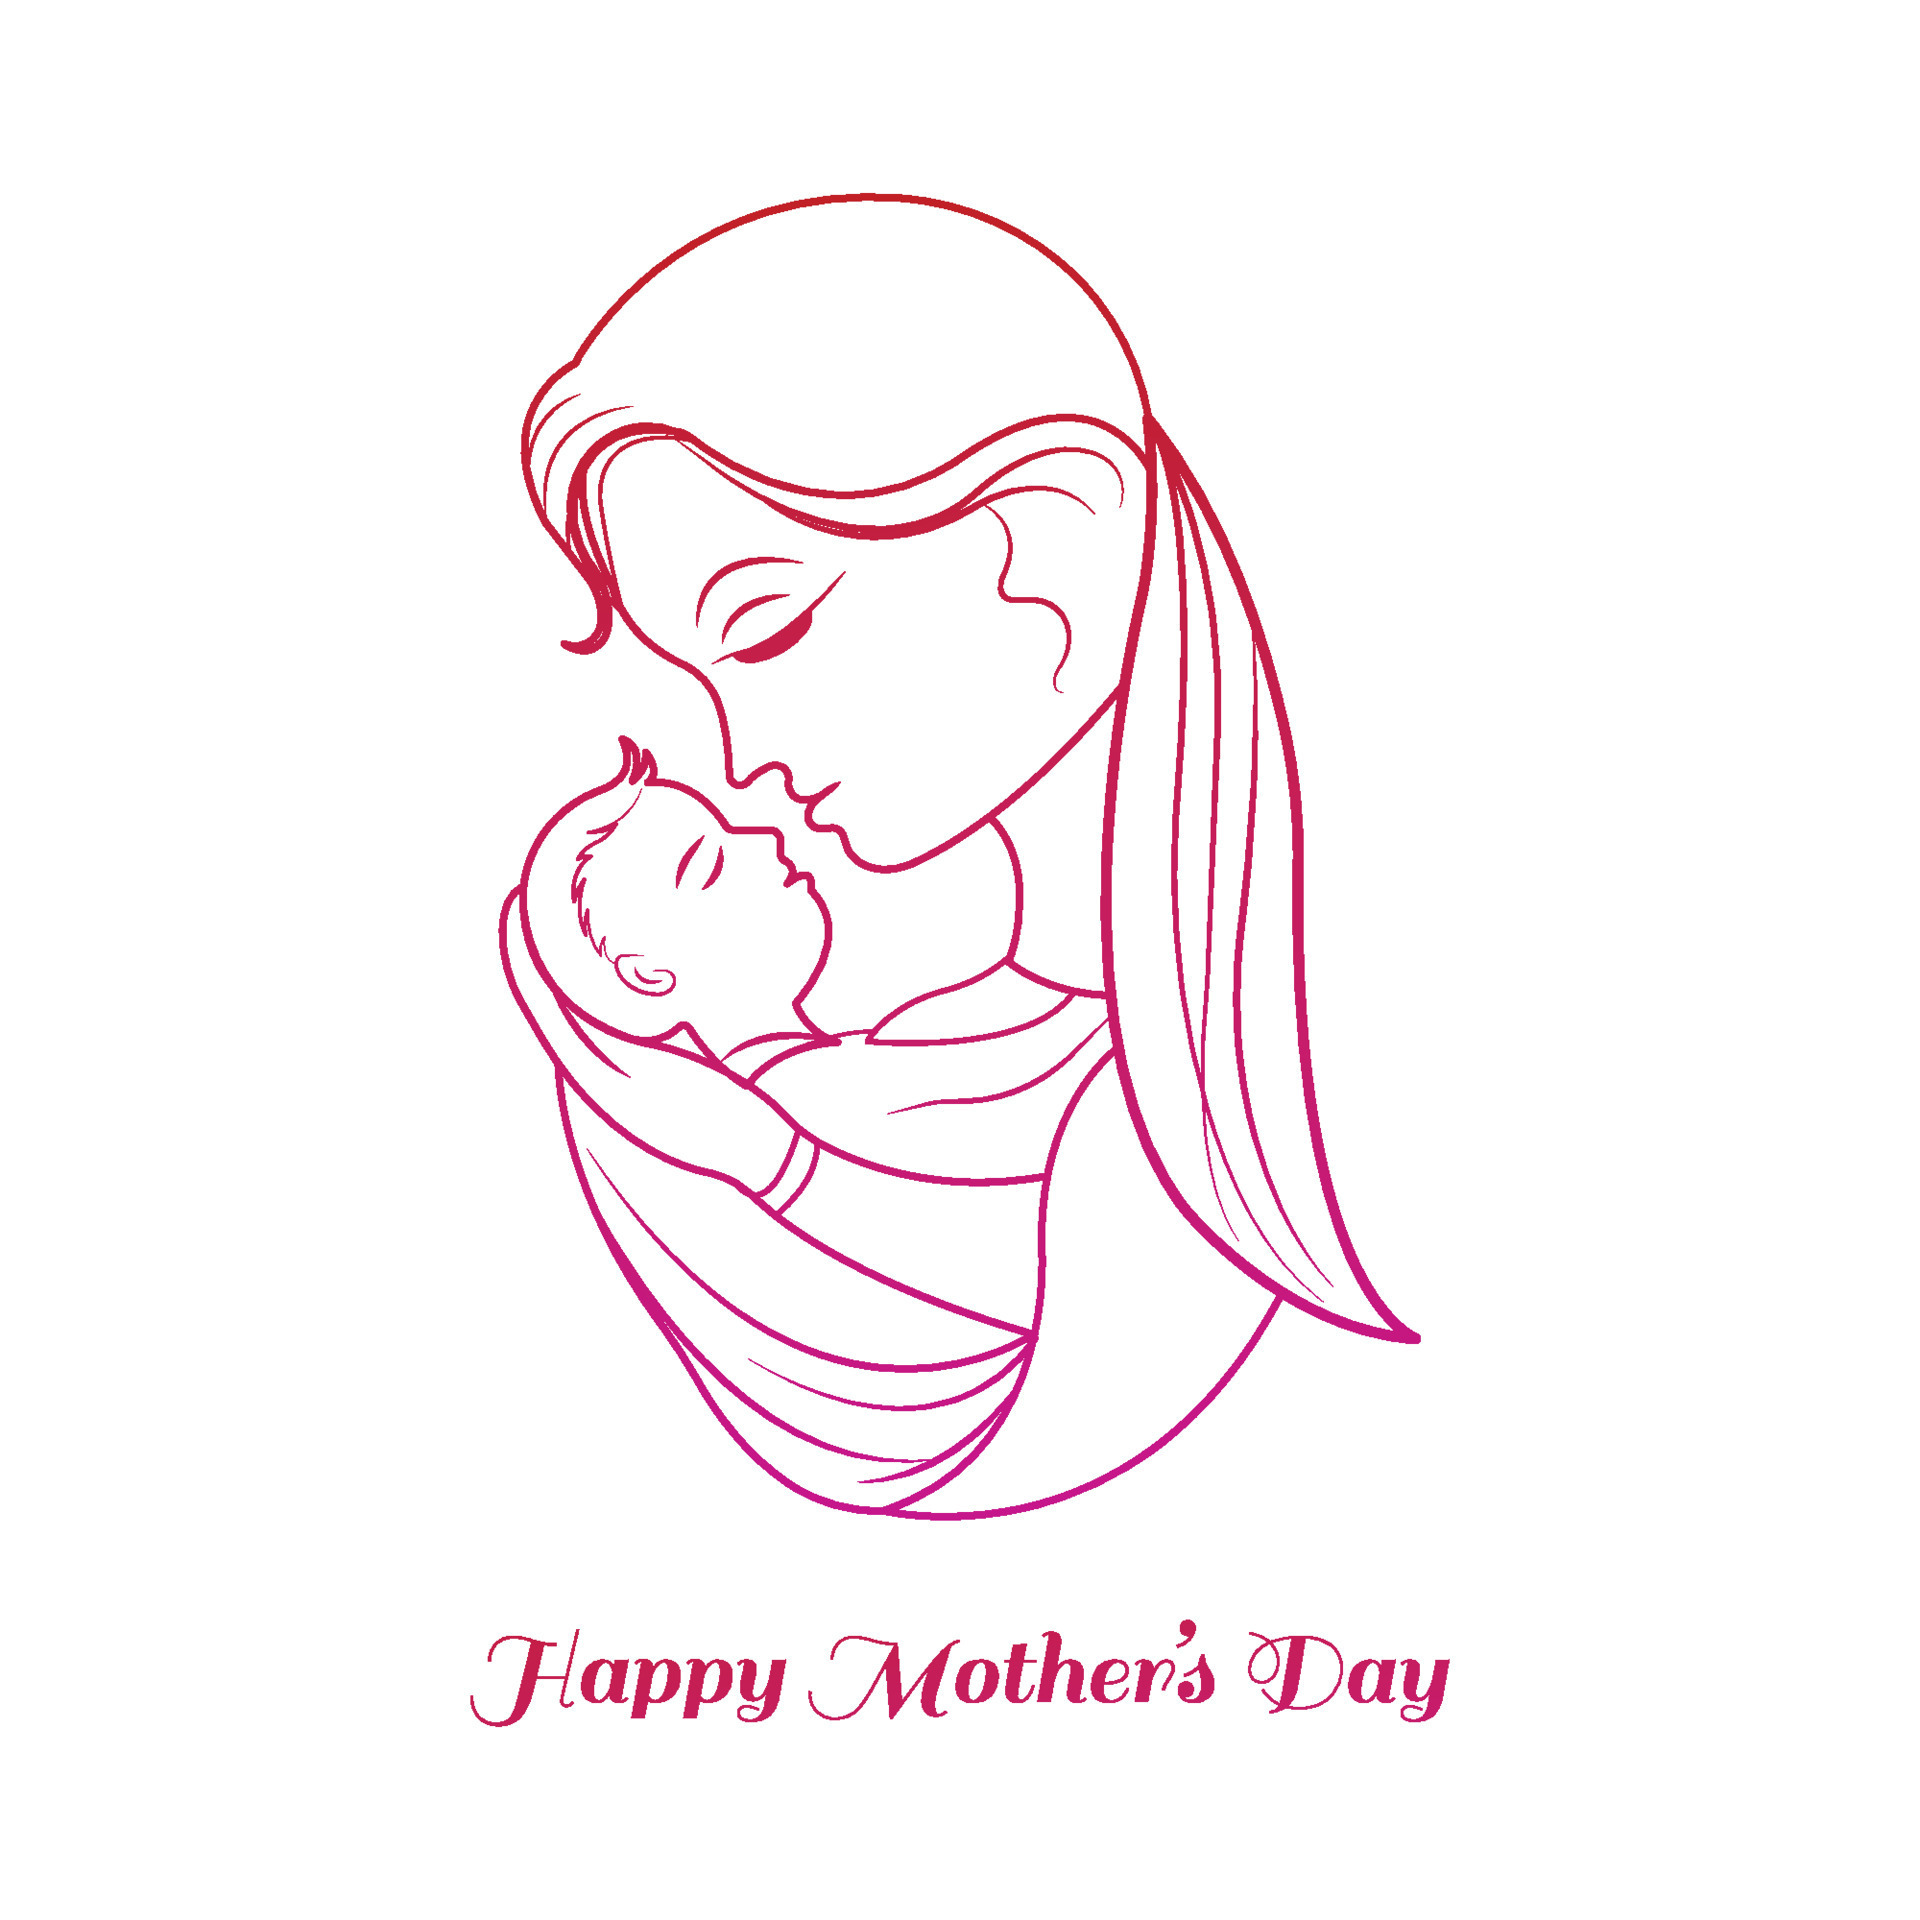 Mother day banner handdrawn mom baby flora sketch vectors stock in format  for free download 2.01MB